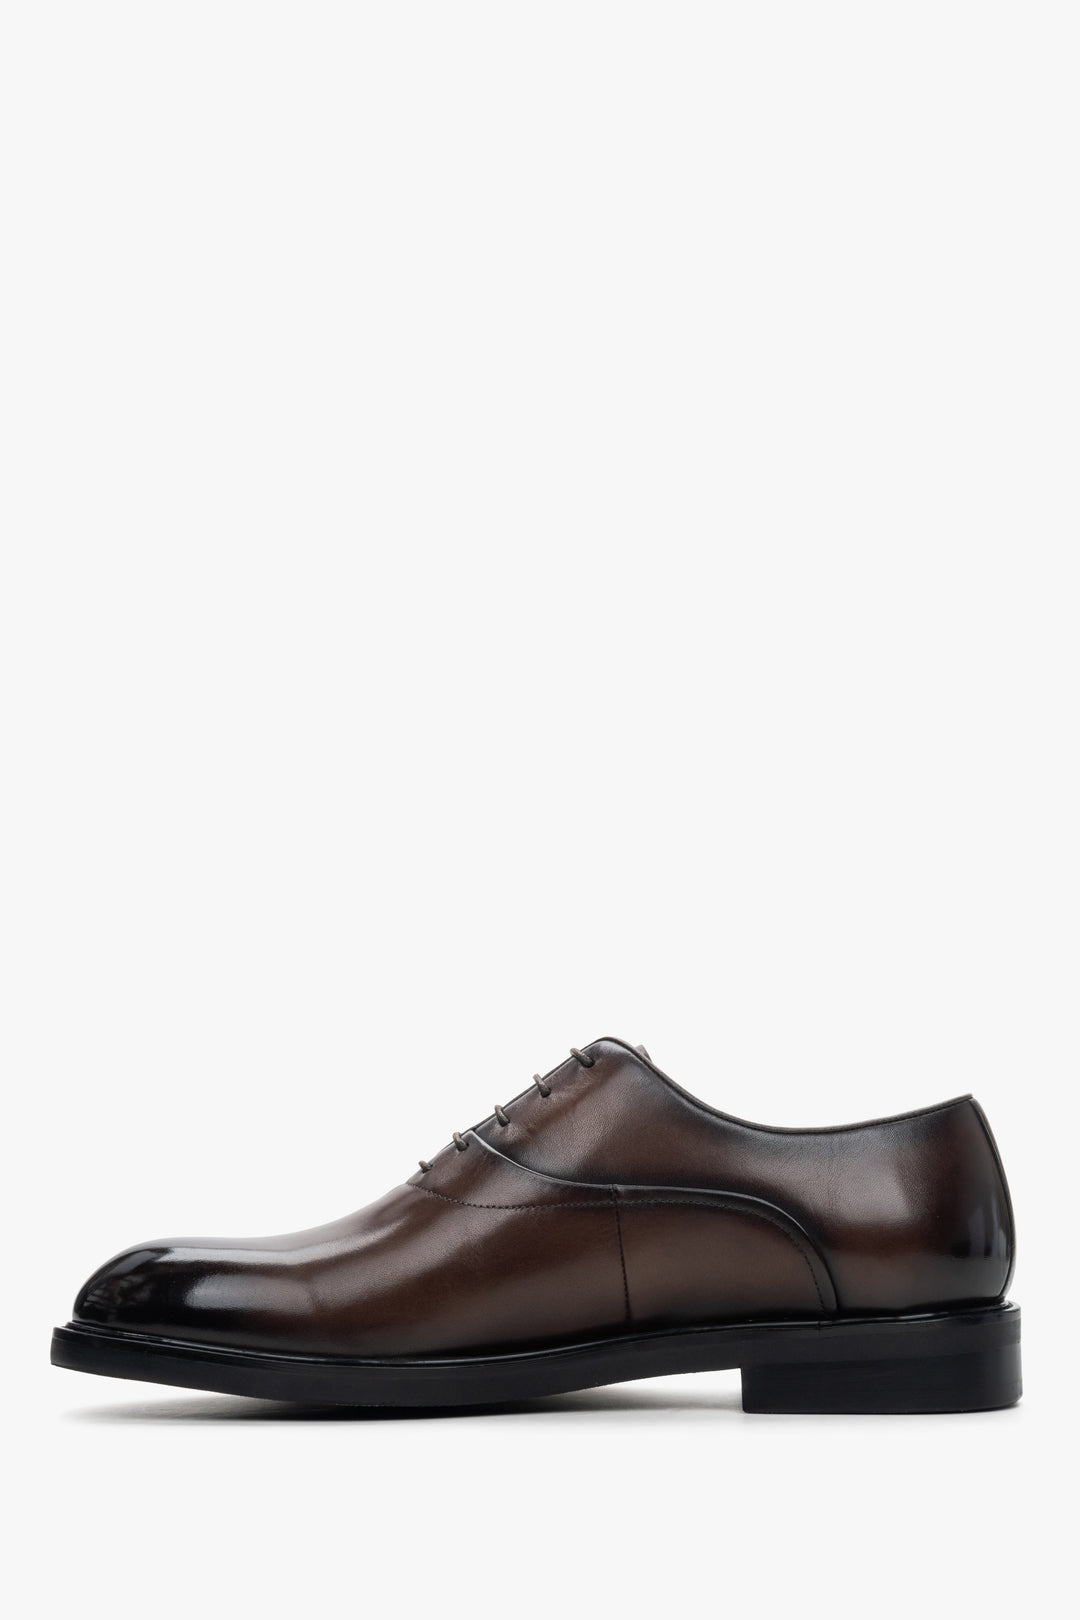 Lace-up men's Oxford shoes made of genuine leather by Estro in brown - shoe profile.